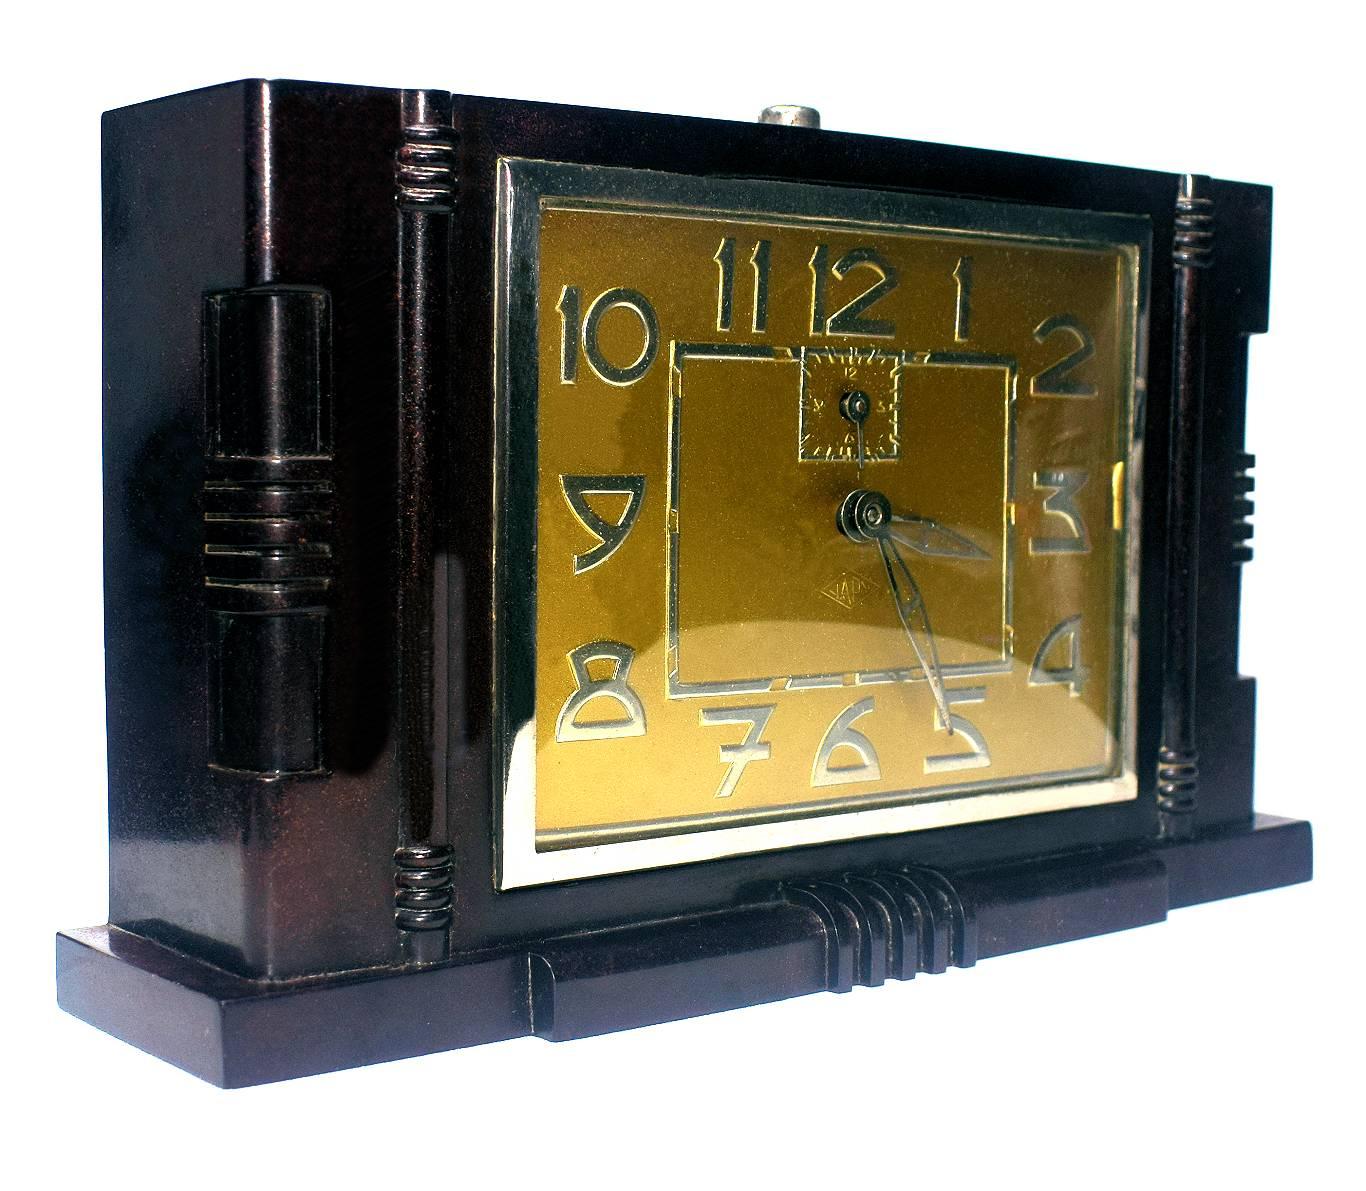 Impressive large 1930s Art Deco Bakelite table or mantel clock by the French company Japy. Great geometric bakelite case and numerals. As with all of our clocks this is in full working order. Condition is excellent with little to no signs of its age.